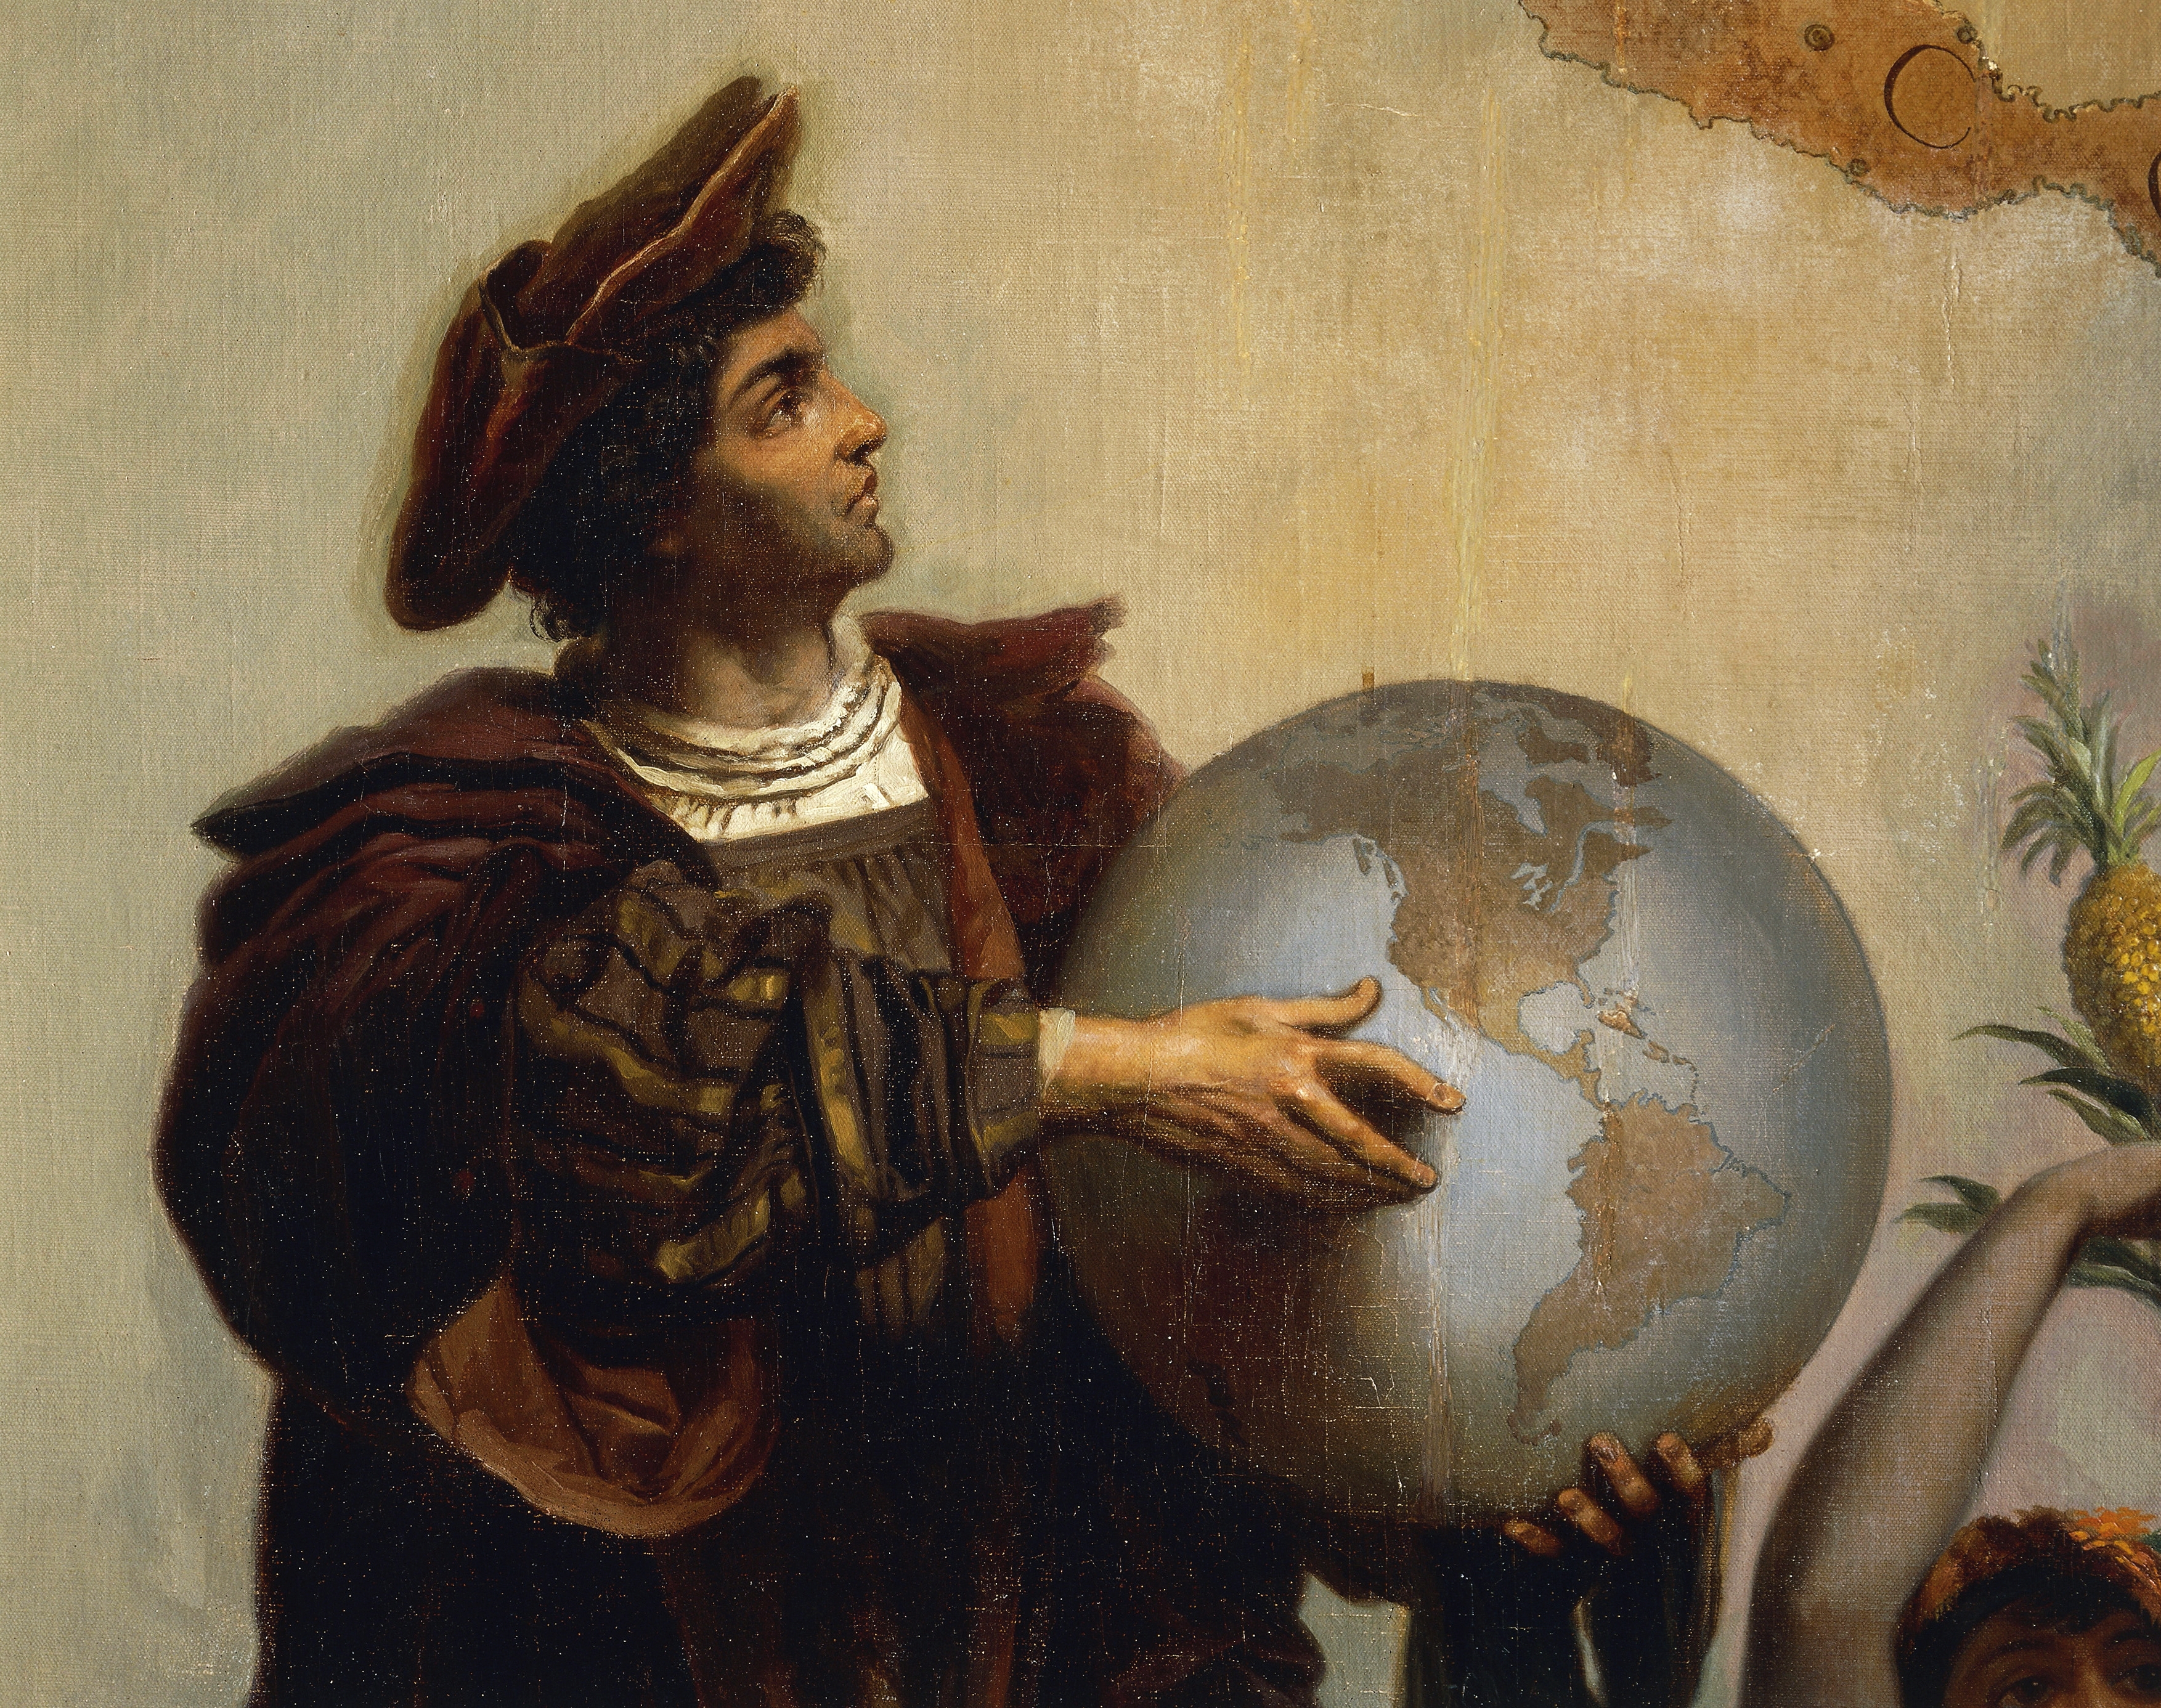 Christopher Columbus (1451-1506), painting by Peter Johann Nepomuk Geiger (1805-1880). (De Agostini—Getty Images)